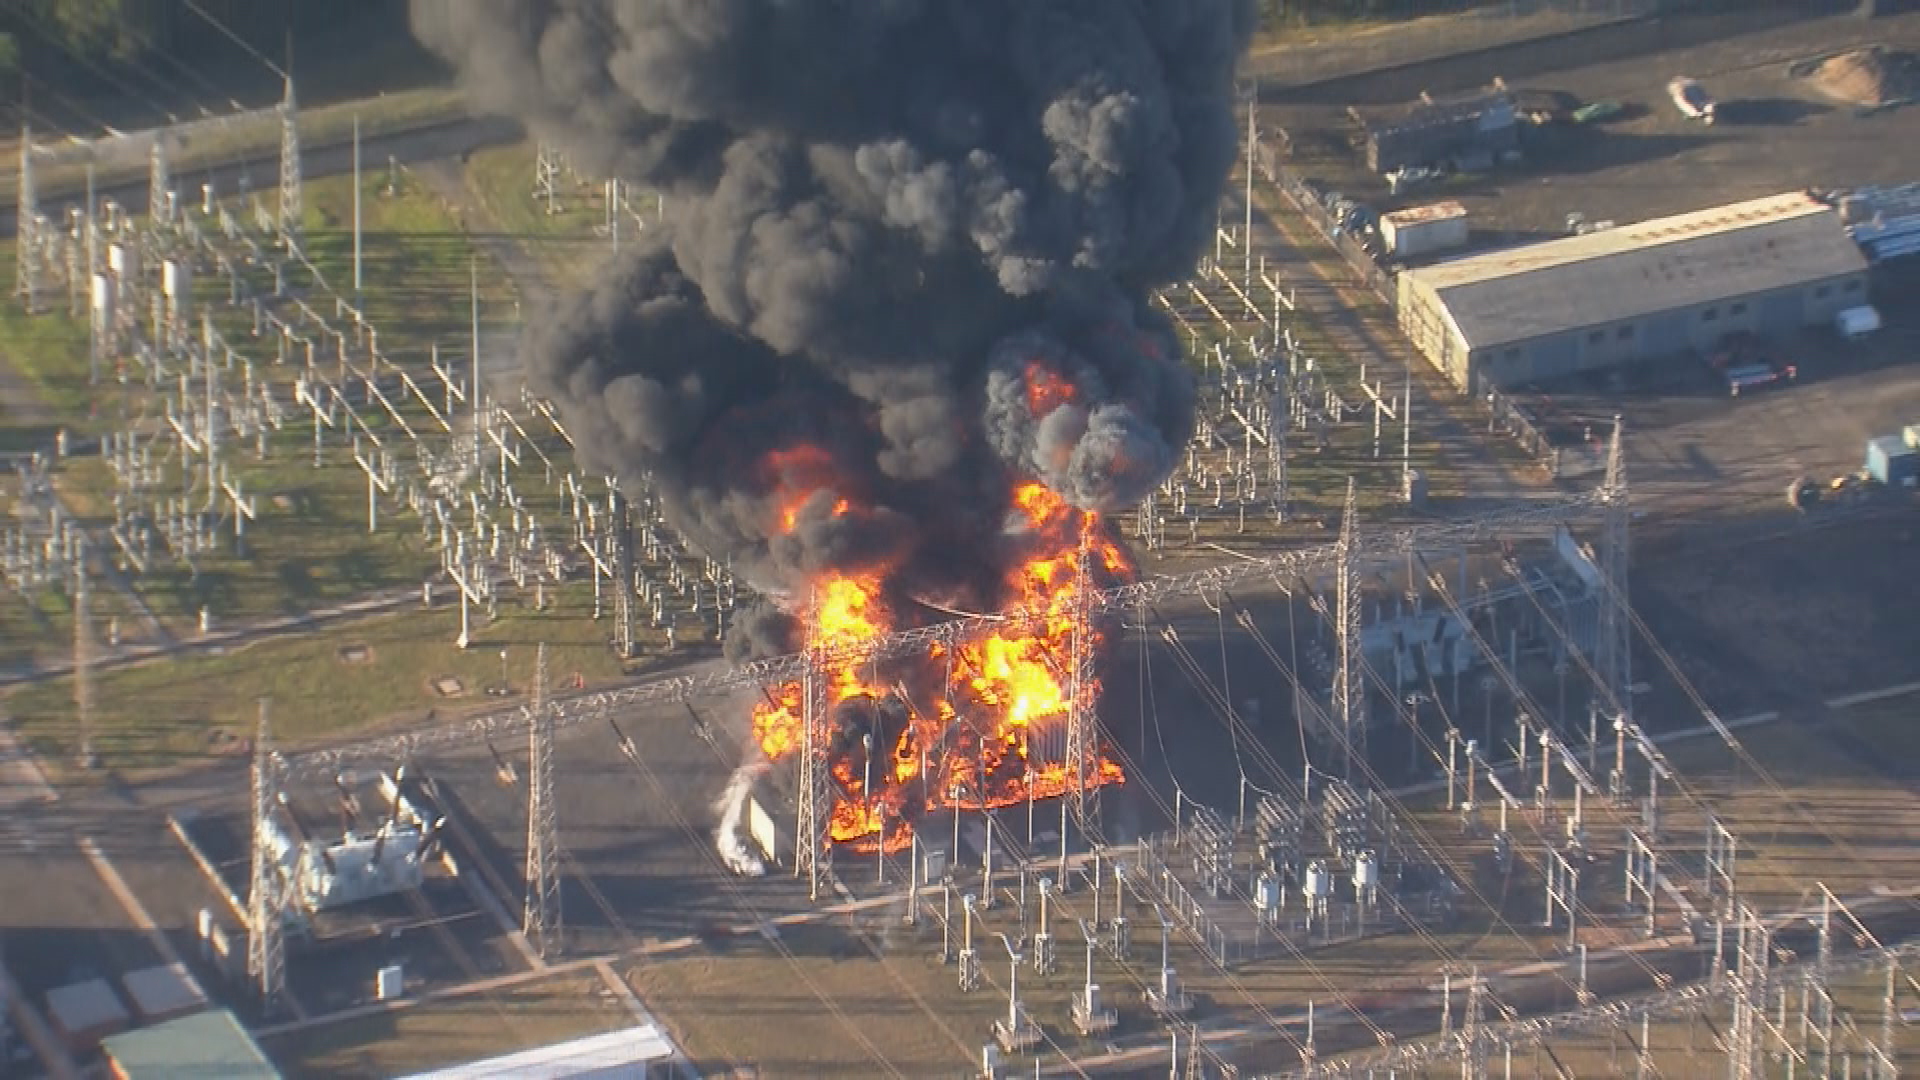 A major fire is underway at Tallawarra Power Station in Wollongong. 